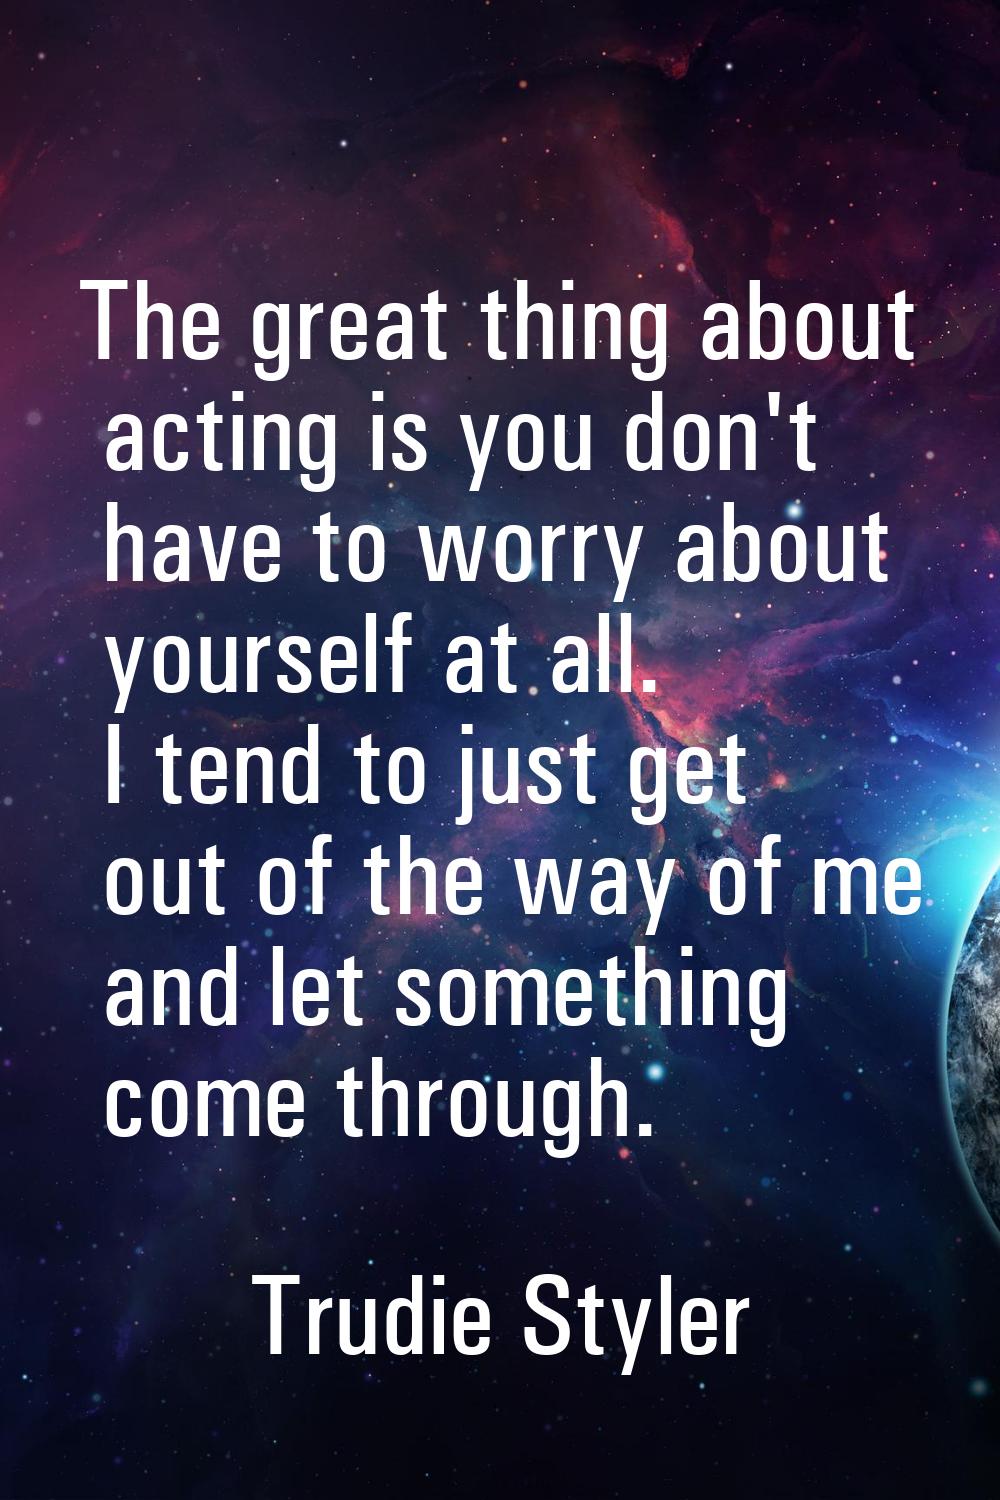 The great thing about acting is you don't have to worry about yourself at all. I tend to just get o